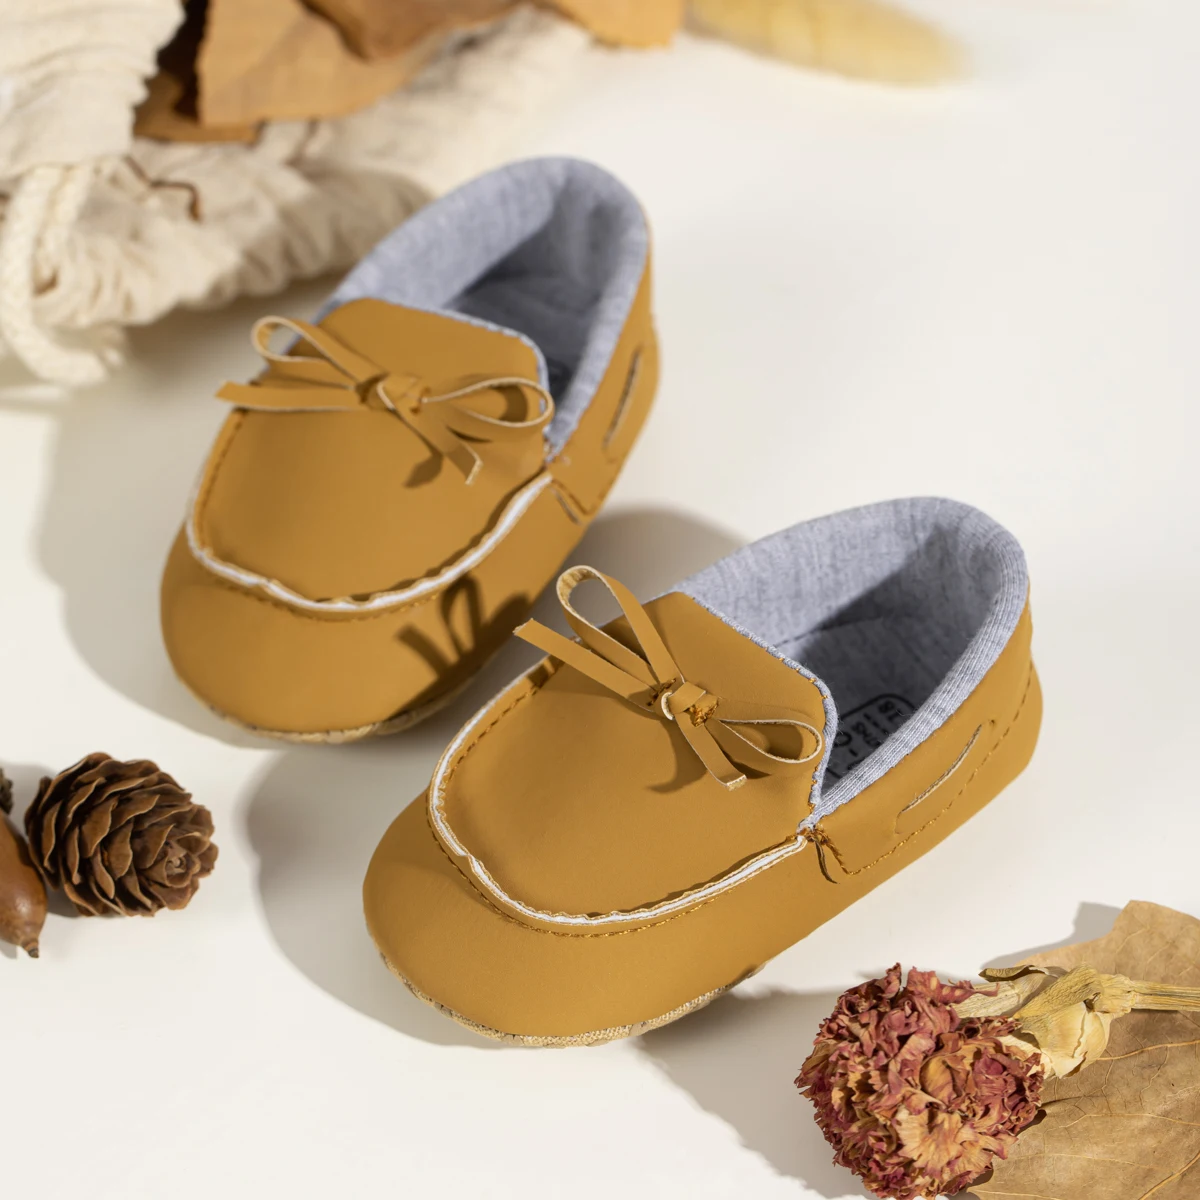 KIDSUN Khaki Baby Casual Shoes Flats Anti-Slip Cotton Sole Newborns Boy Girl Shallow First Walkers Infant Toddler Shoes qunq korea style baby girl first walkers summer knitted casual newborns princess shoes 2021 new flower lace infant flats